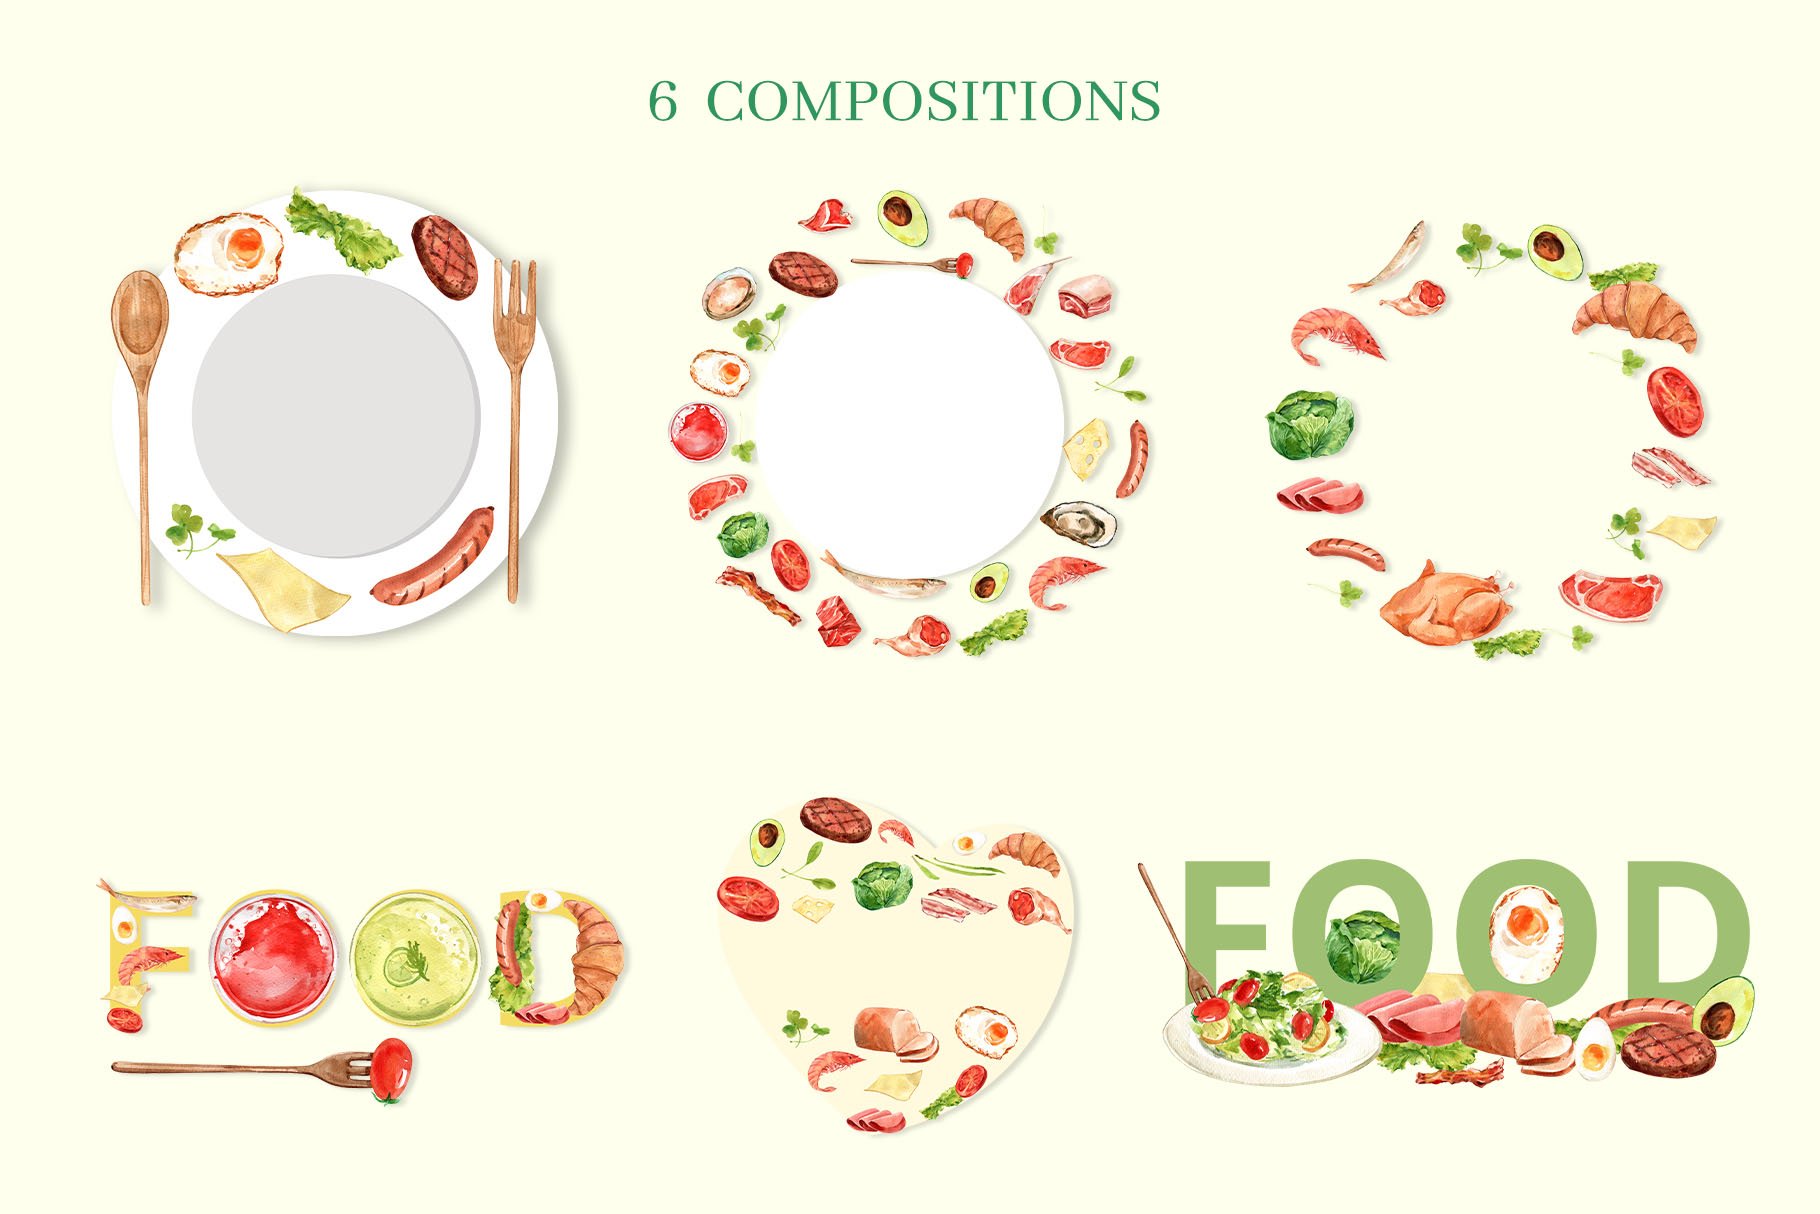 World food day compositions.